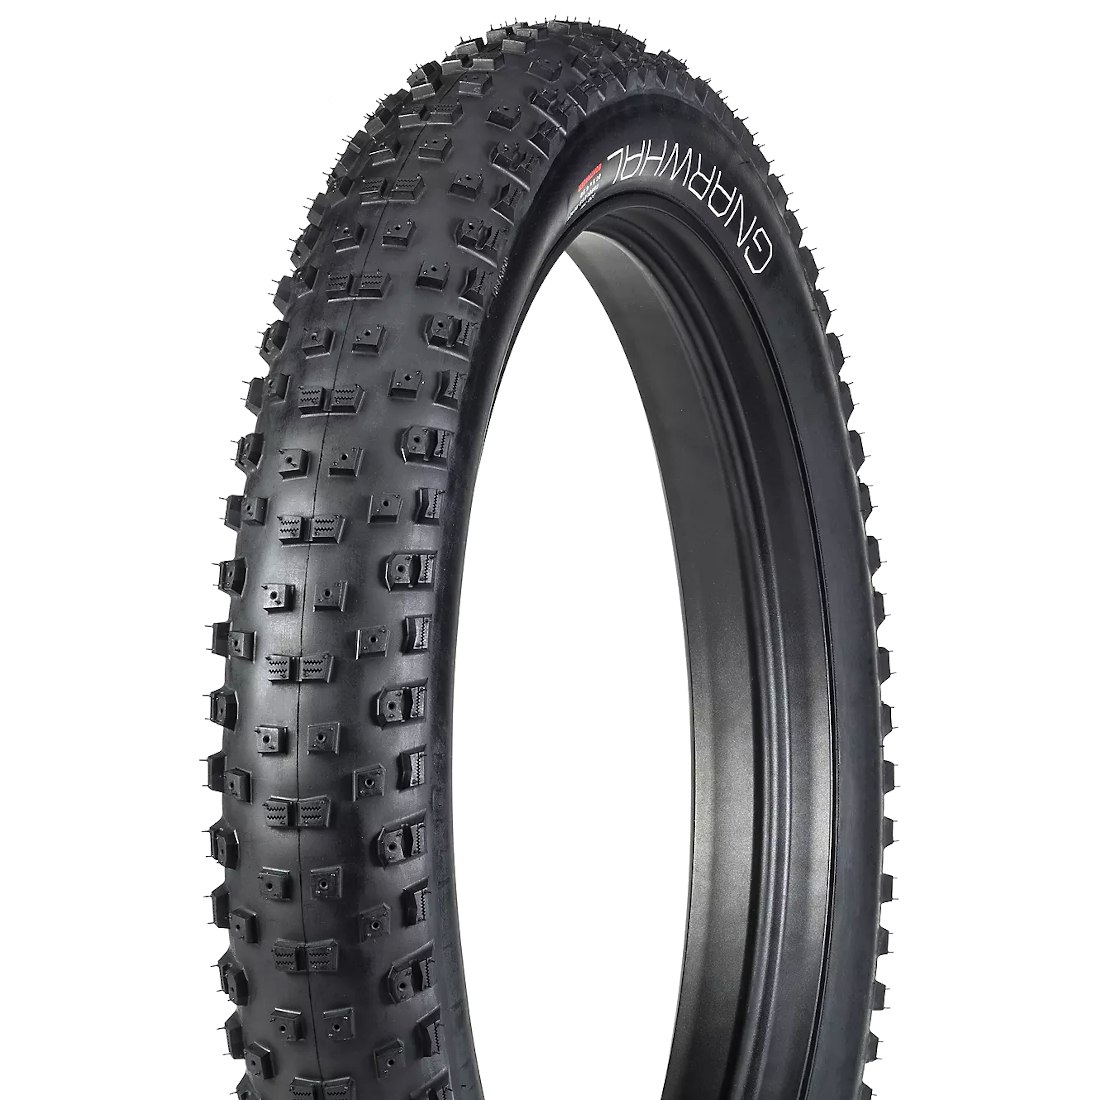 Picture of Bontrager Gnarwhal TLR Fatbike Folding Tire 27.5x4.50 Inches